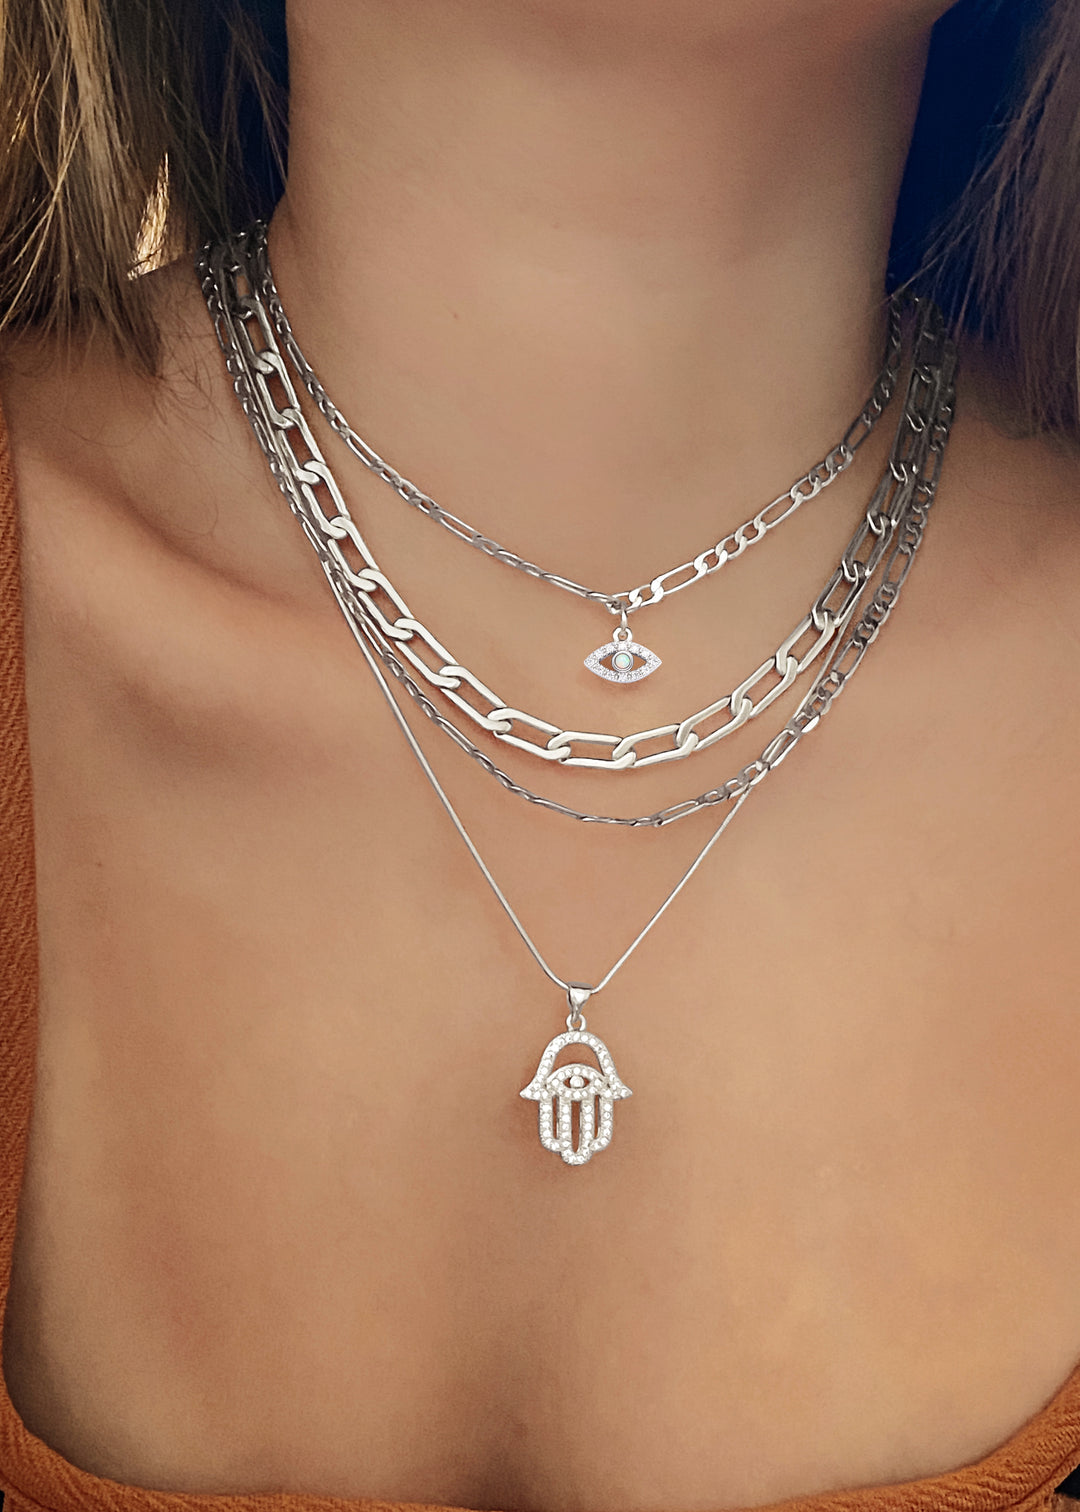 Hamsa Hand Necklace - White Gold Filled